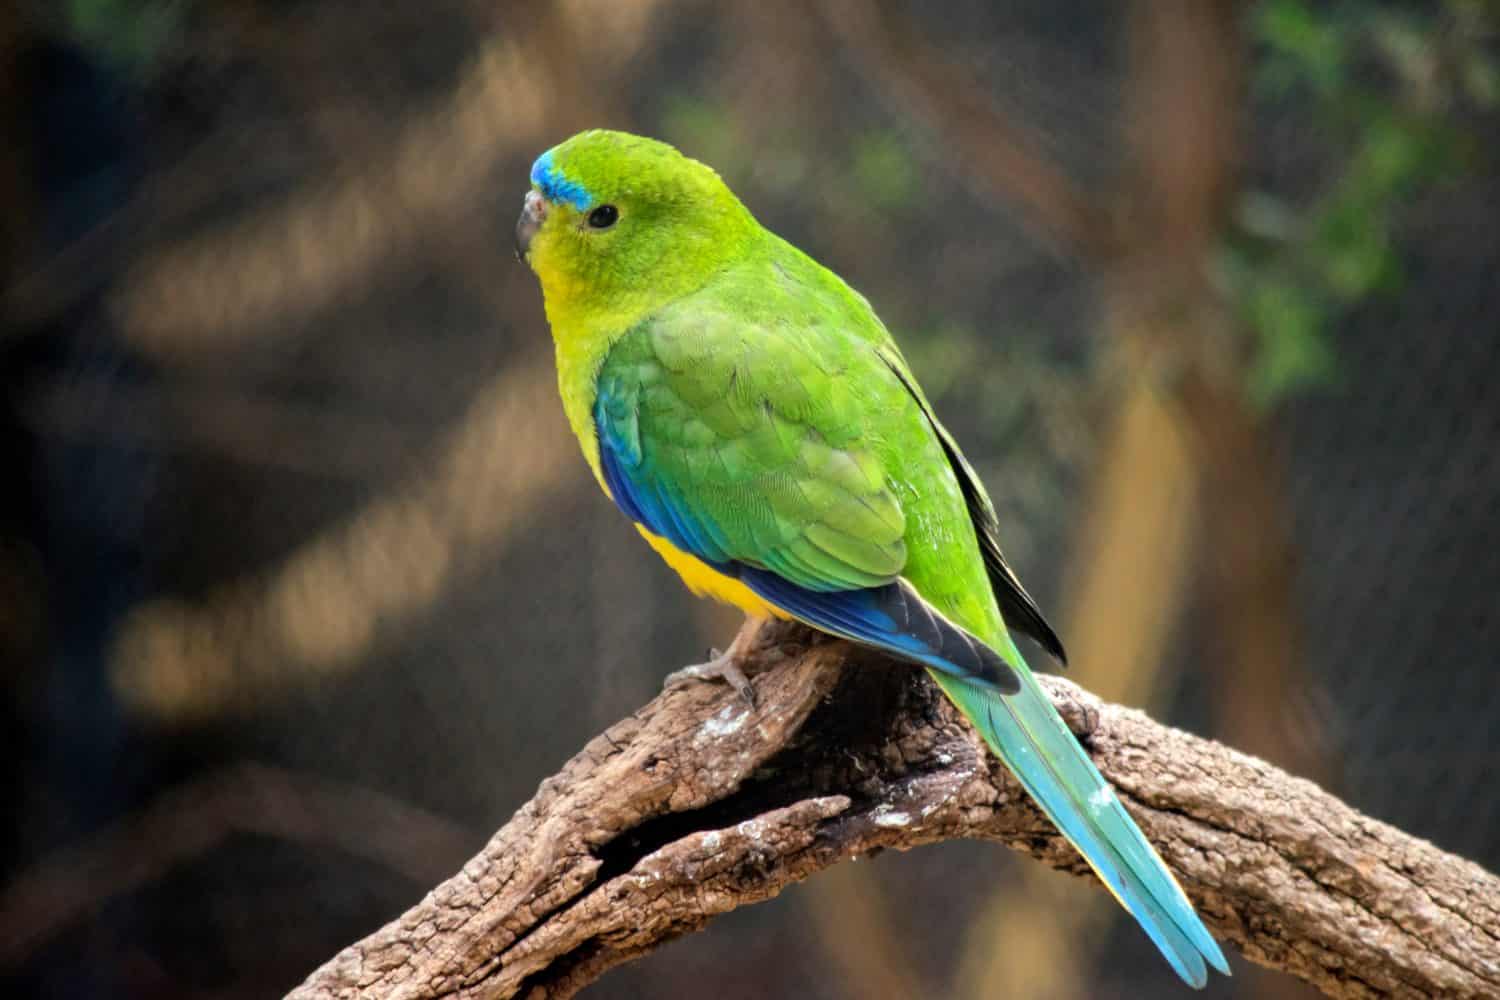 the blue winged parrot is mainly green with a yellow underside and a blue eyebrow and blue on its wings